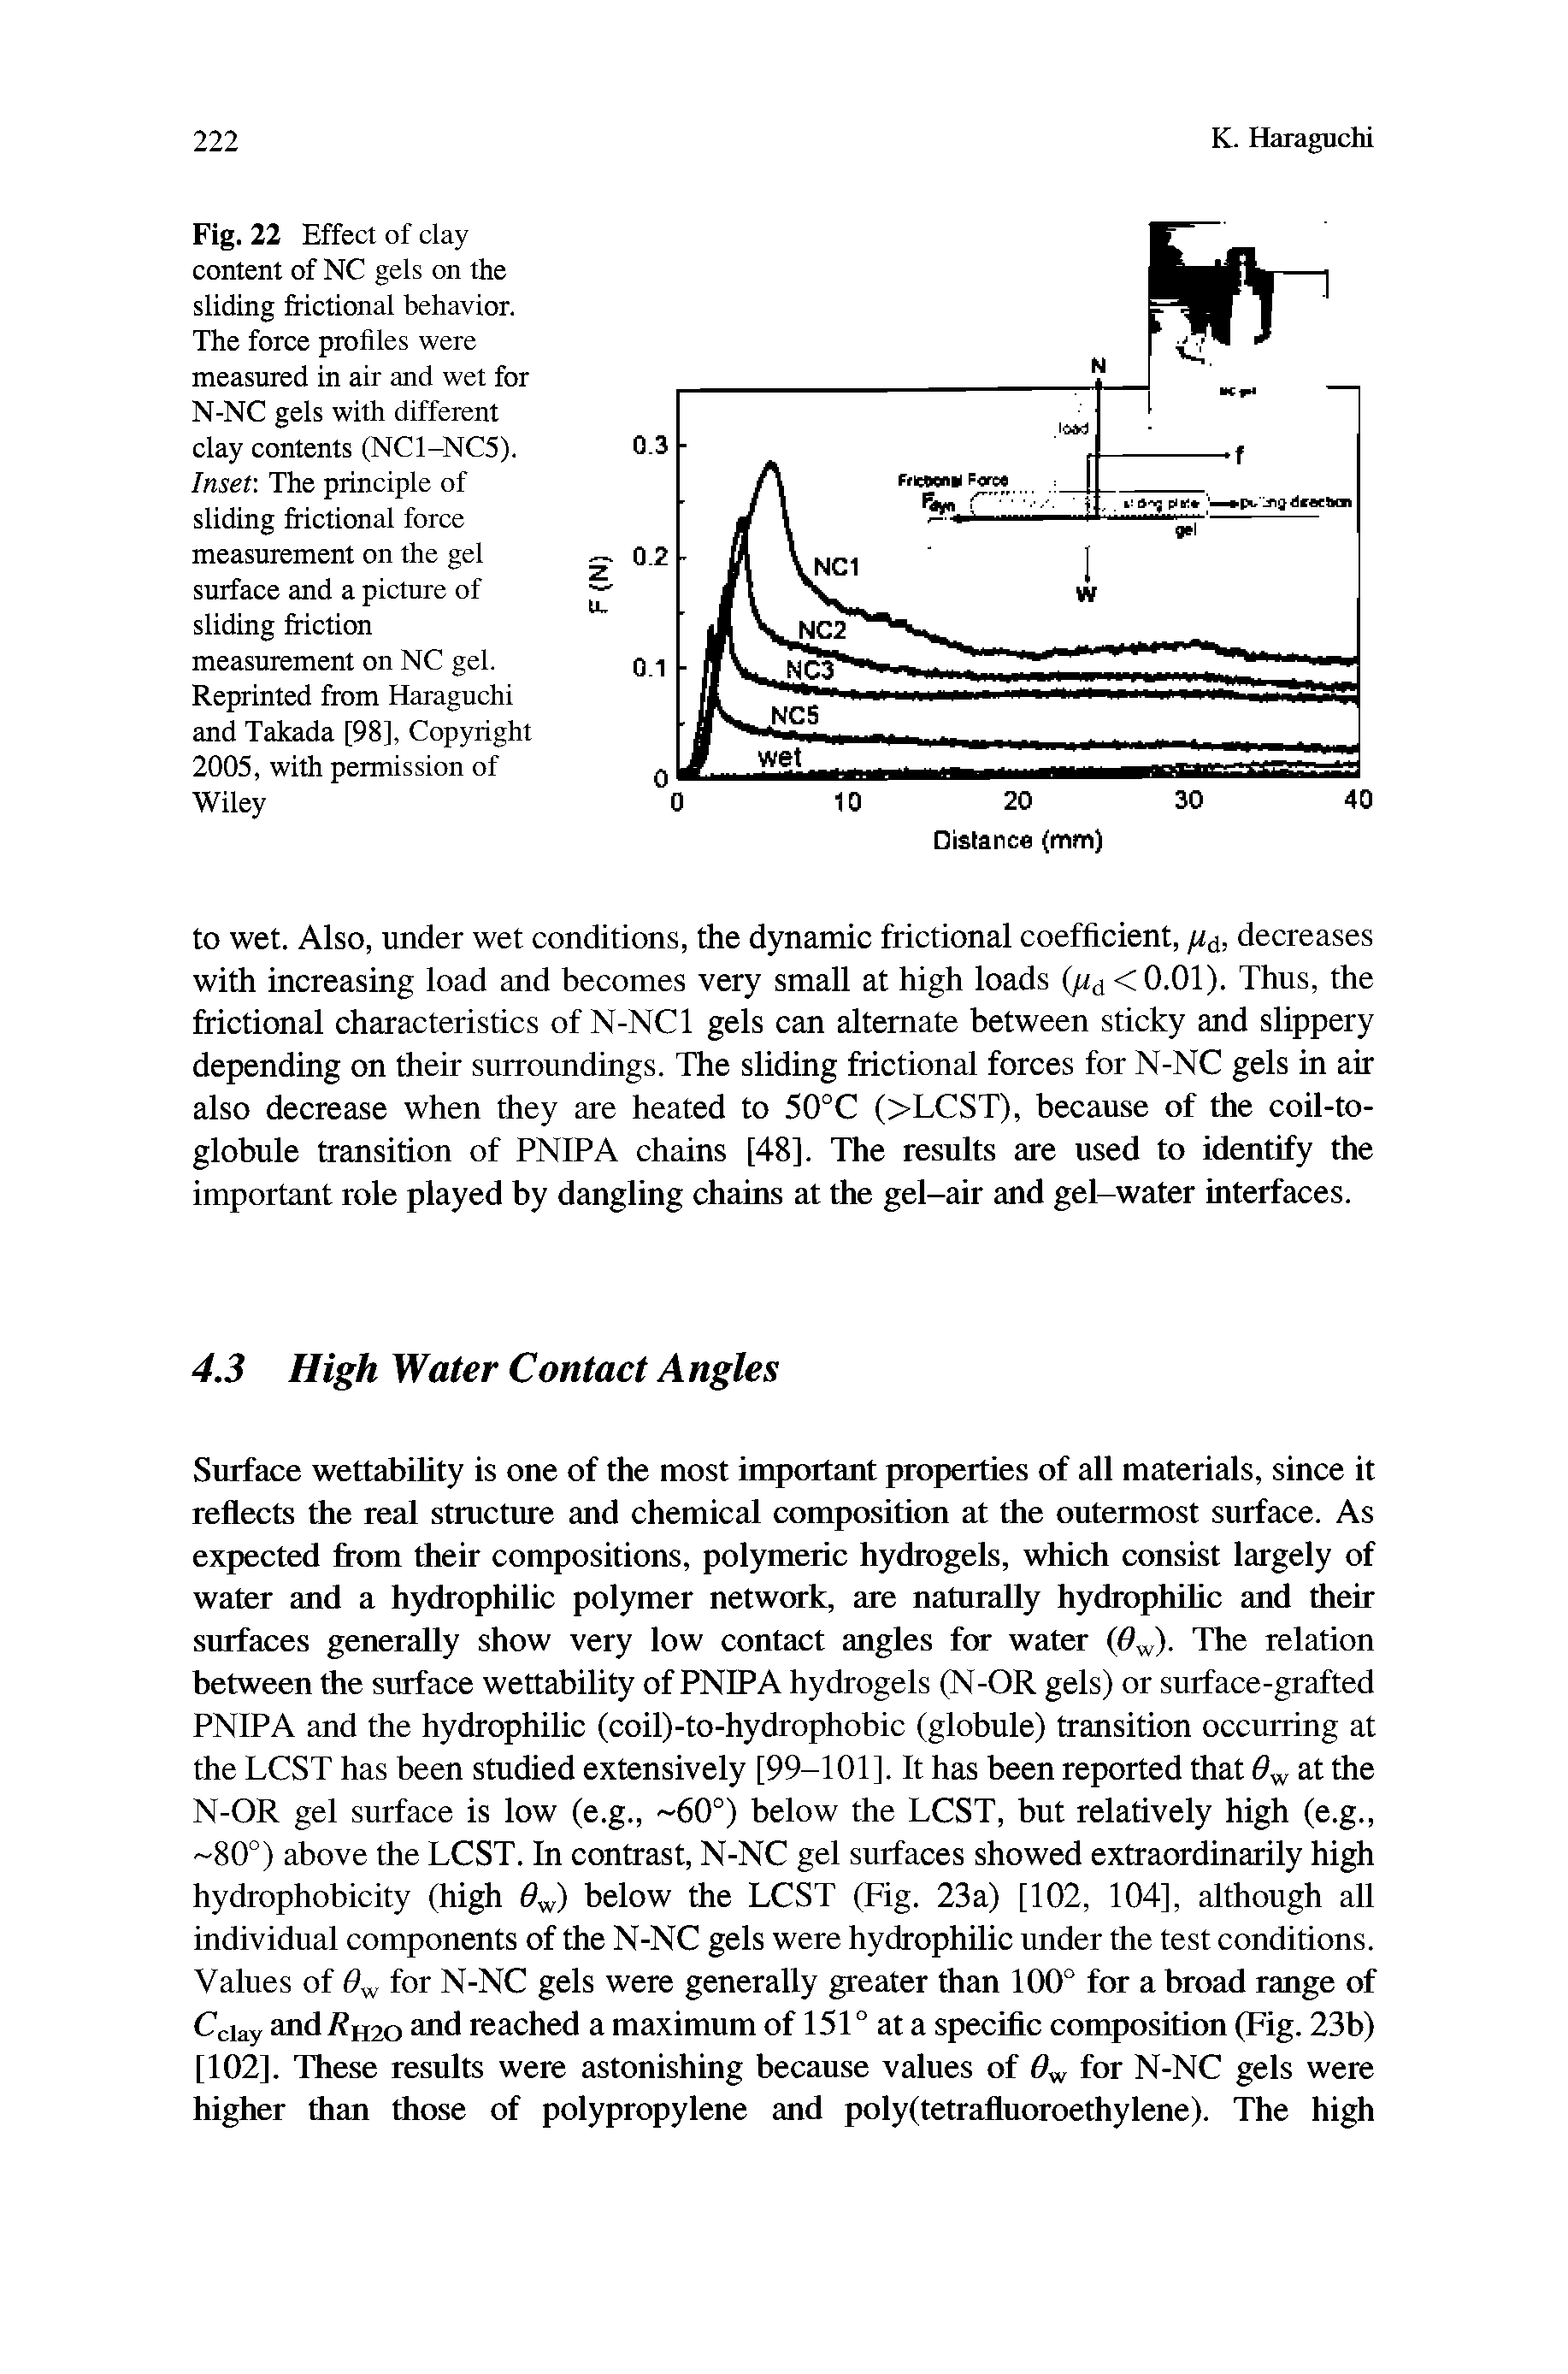 Fig. 22 Effect of clay content of NC gels on the sliding frictional behavior. The force profiles were measured in air and wet for N-NC gels with different clay contents (NC1-NC5). Insef. The principle of sliding frictional force measurement on the gel surface and a picture of sliding friction measurement on NC gel. Reprinted from Haraguchi and Takada [98], Copyright 2005, with permission of Wiley...